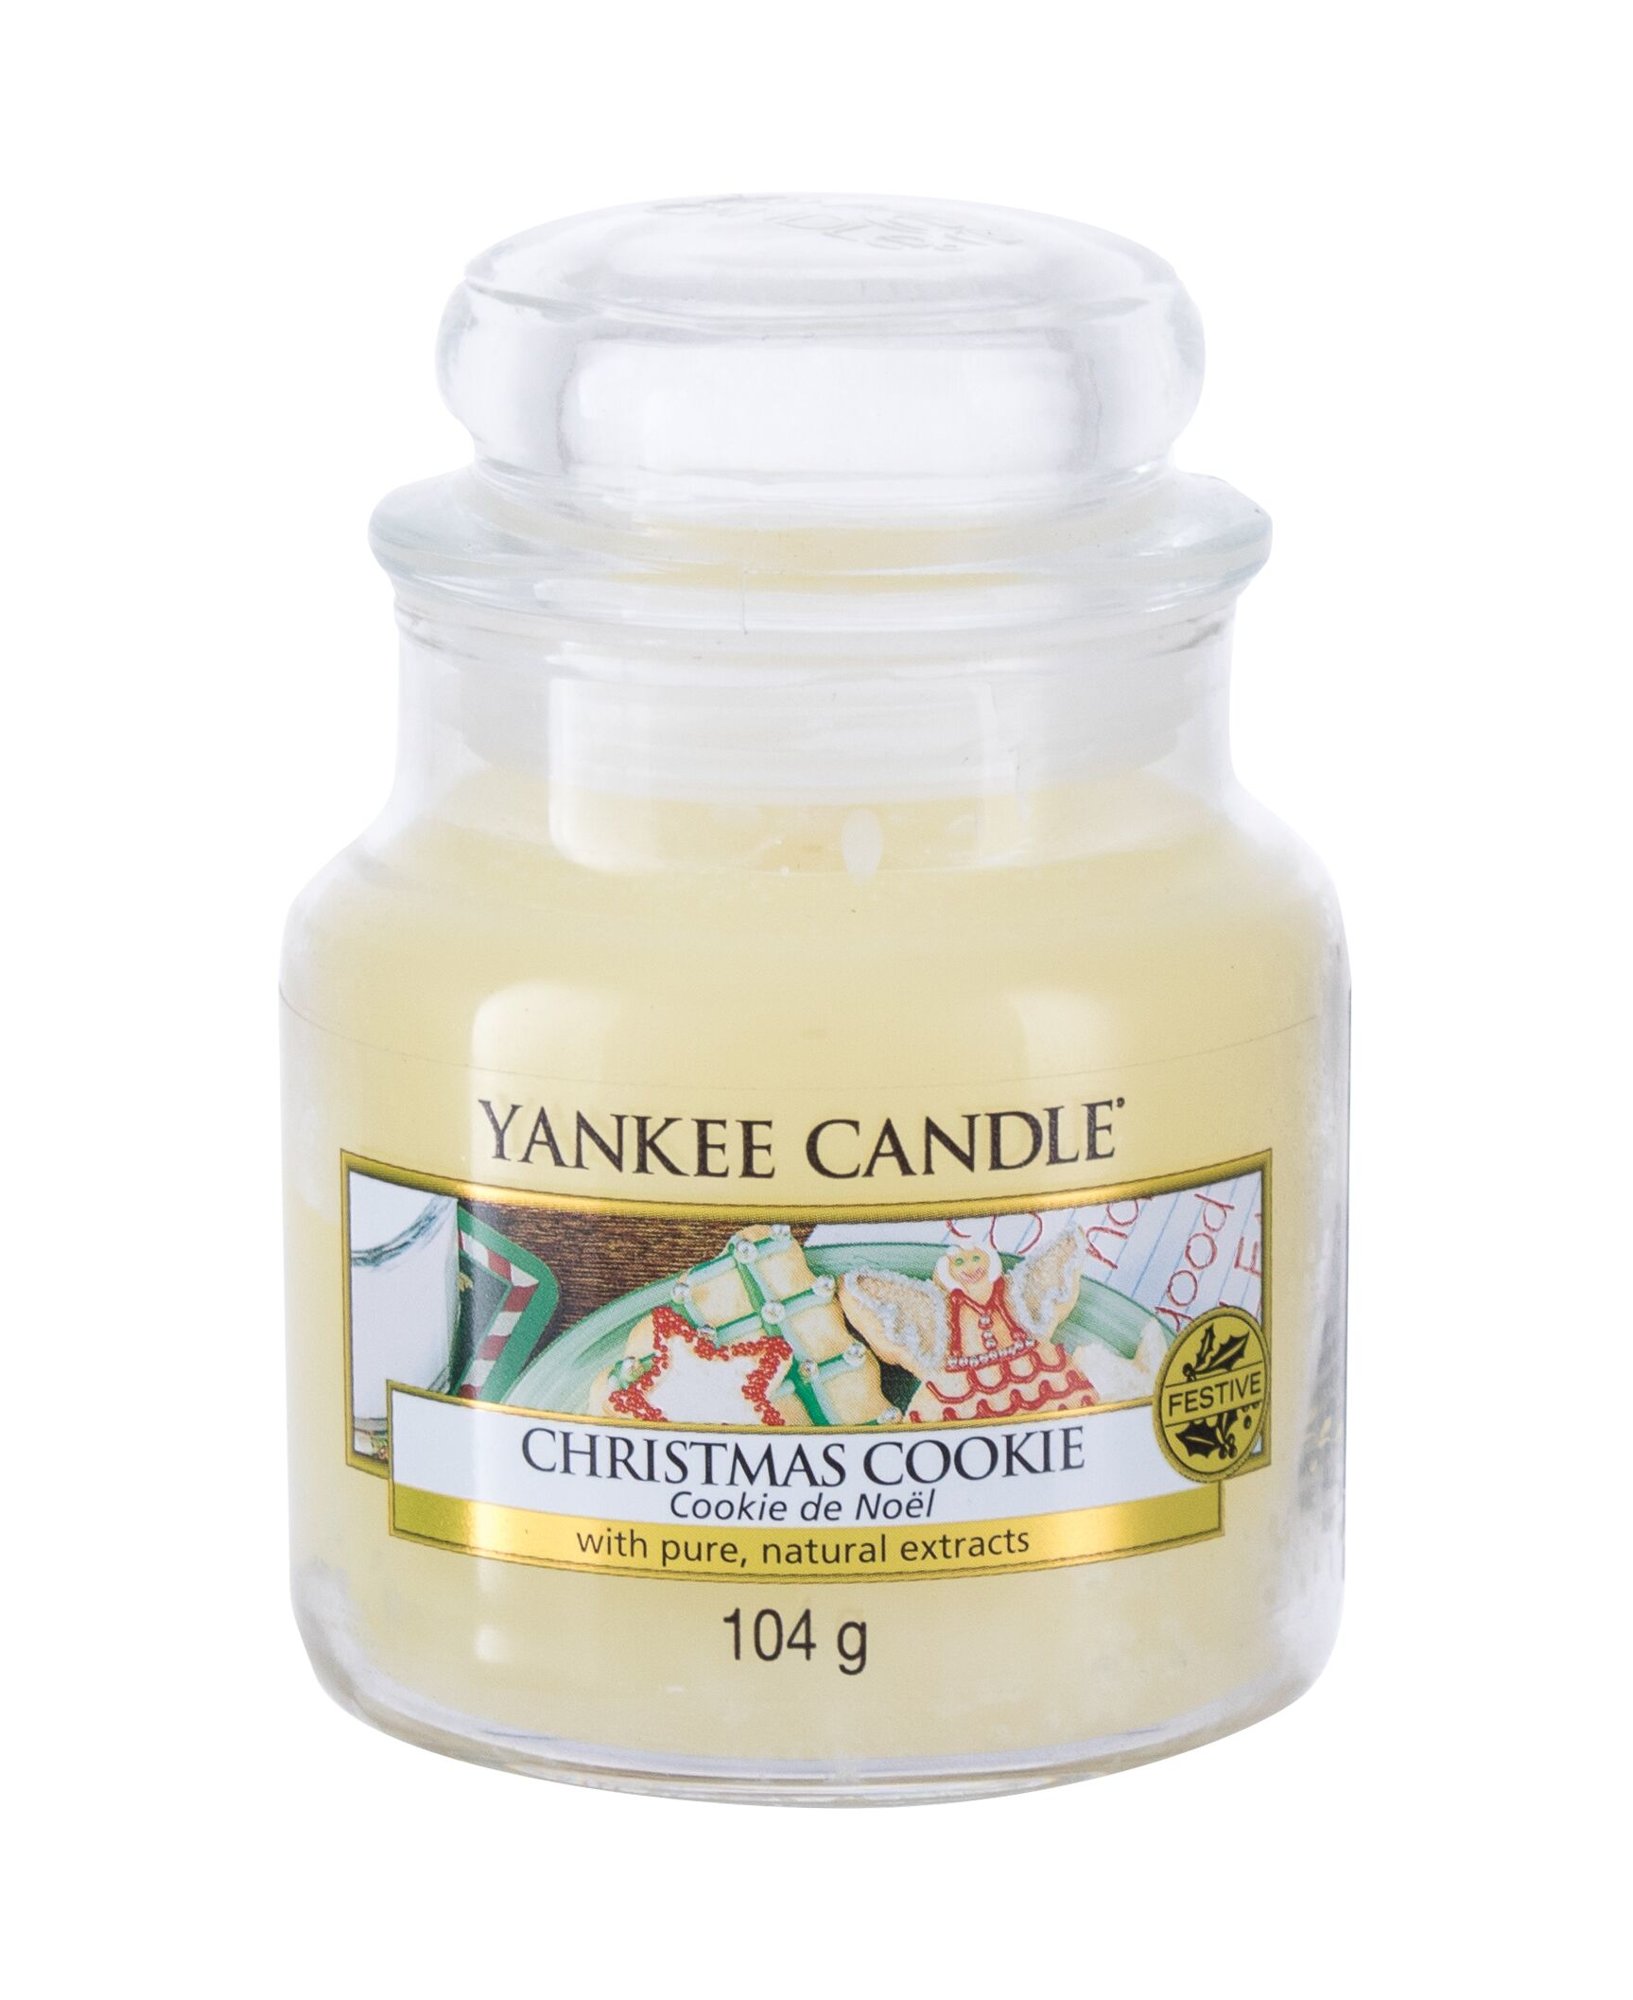 Yankee Candle Christmas Cookie 104g Kvepalai Unisex Scented Candle